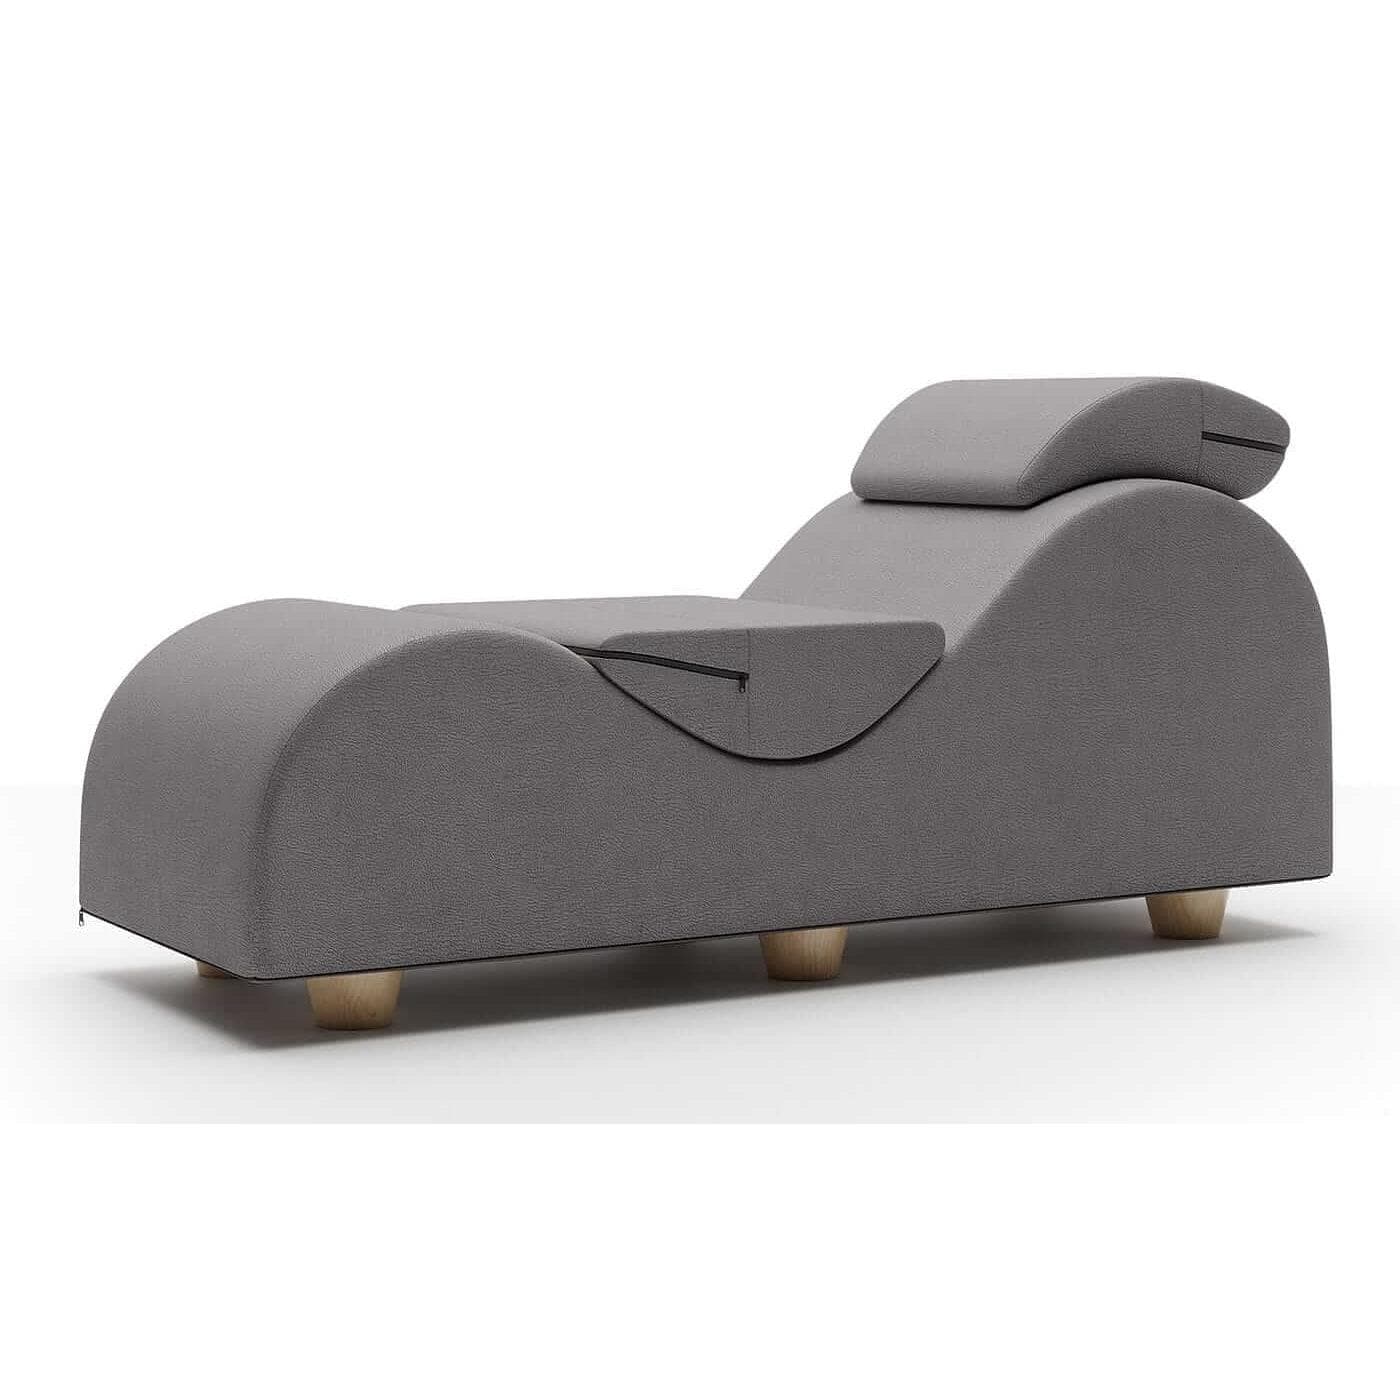 Liberator Esse Lounger II Luxurious Sex Lounge with Wood Feet - Romantic Blessings